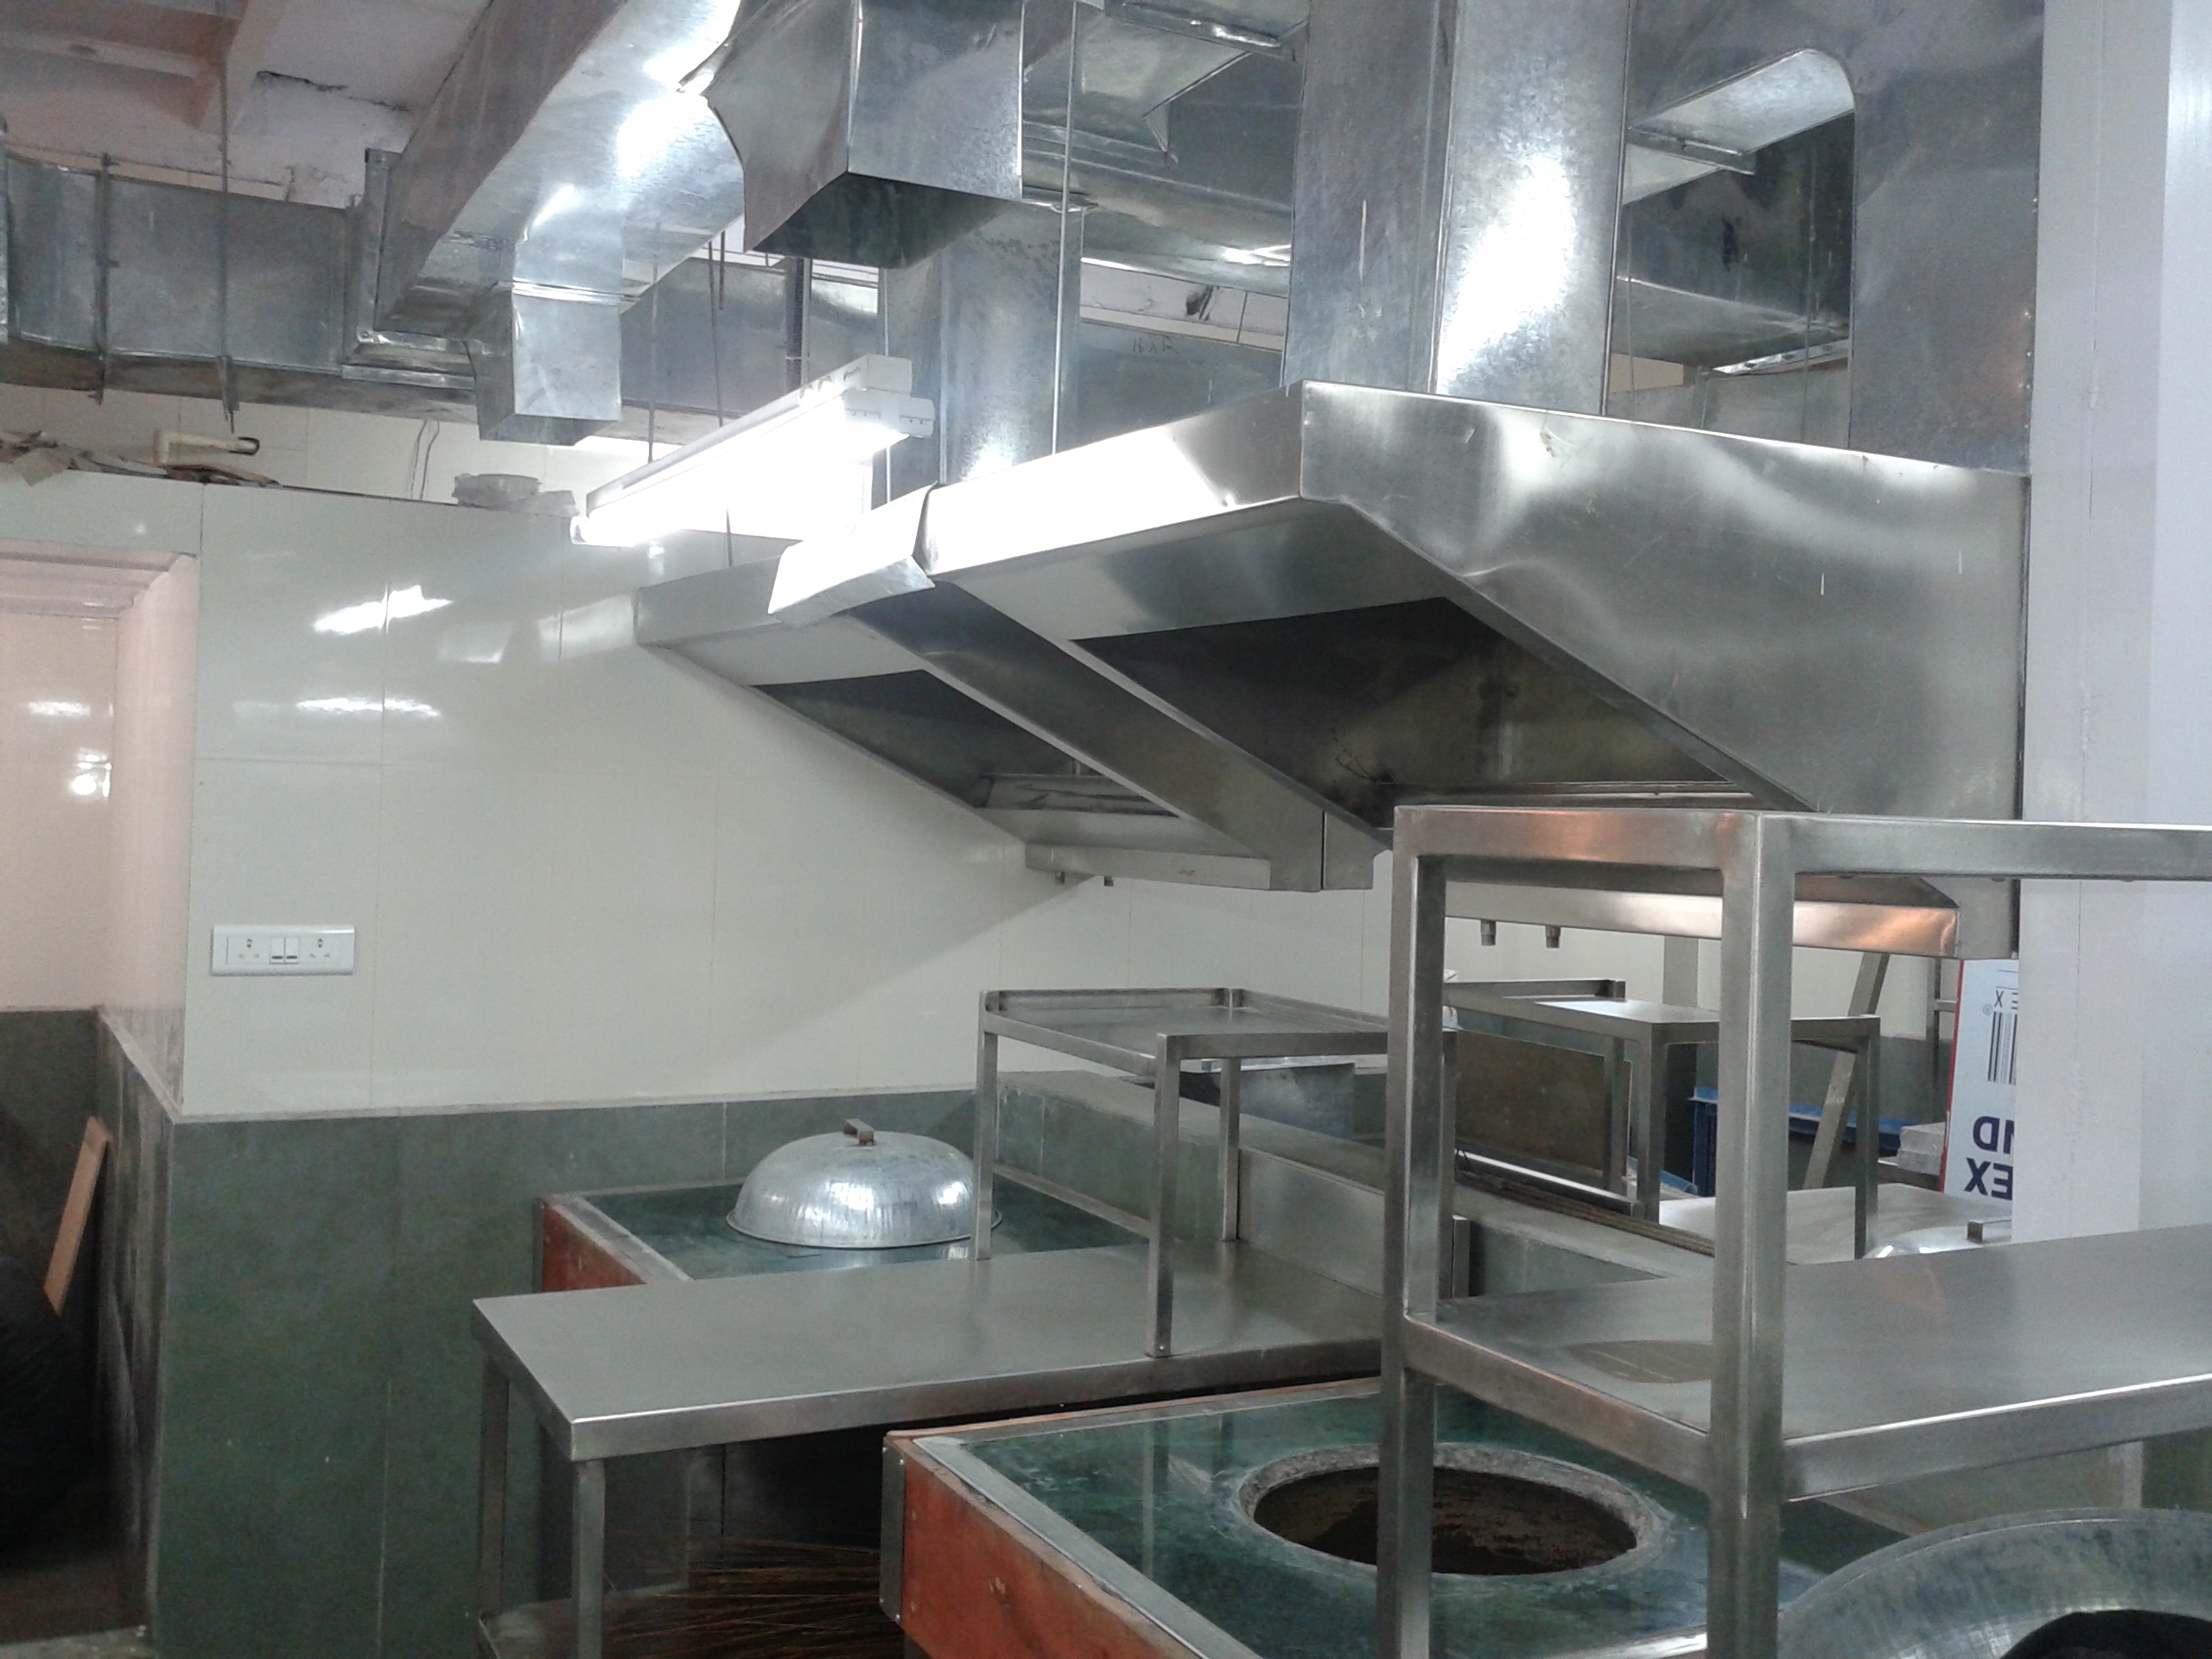 Food Industries Air Cooling and Industrial Ventilation